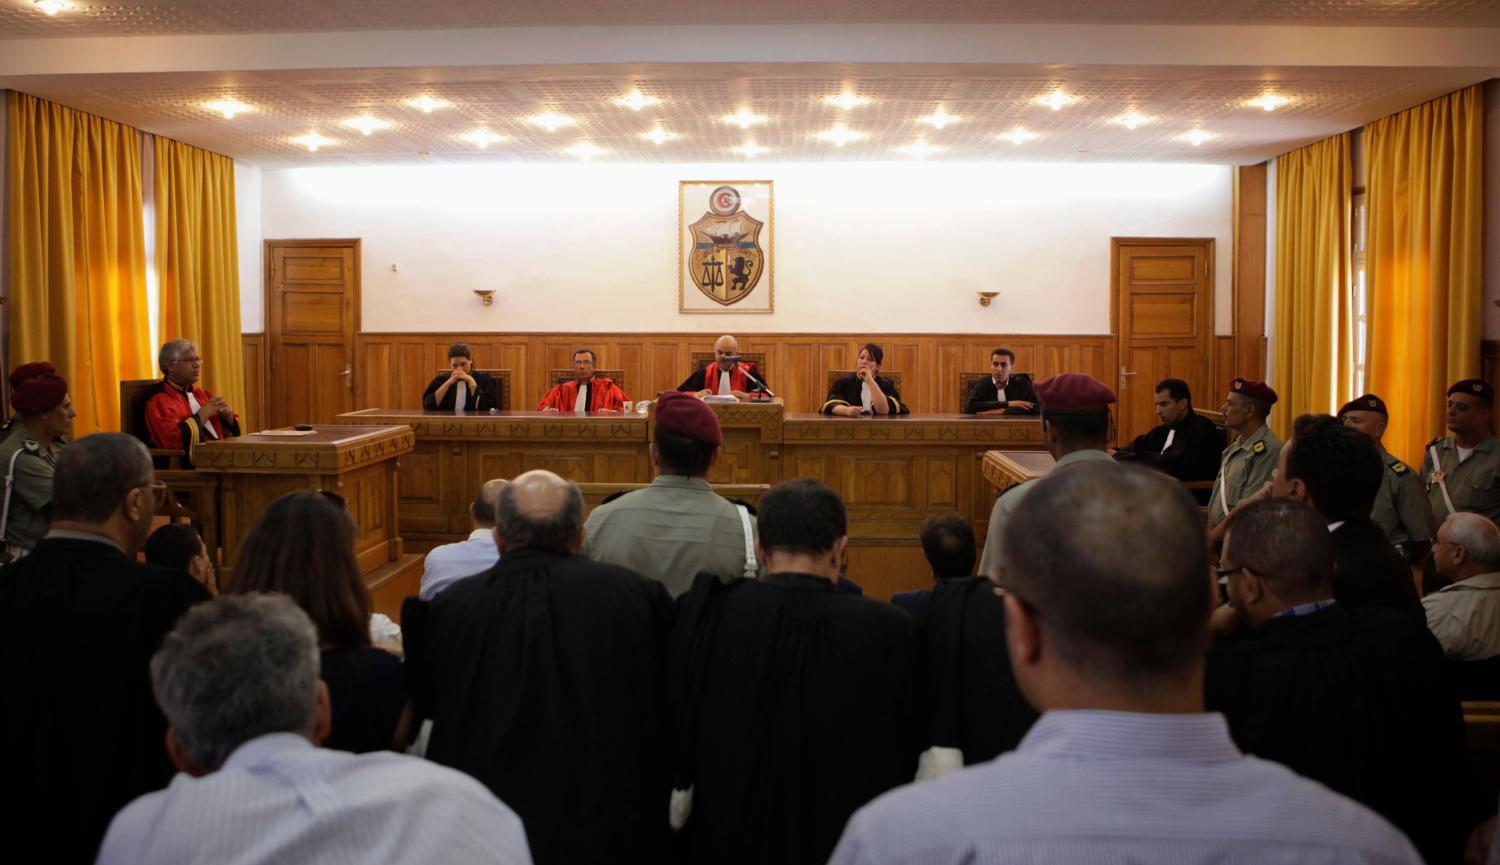 A general view of the trial is seen at a military court in Tunis July 19, 2012. Former Interior Minister Rafik Belhaj Kacem was sentenced to 15 years in jail and Ben Ali's security chief Ali Seriati was given 20 years over the killing of protesters in the capital Tunis and the towns of Sousse, Nabeul, Bizerte and Zaghouan as a popular uprising spread through the country early last year. Ben Ali fled with his family to Saudi Arabia. REUTERS/Zoubeir Souissi (TUNISIA - Tags: POLITICS CRIME LAW) - GM1E87J1QML01